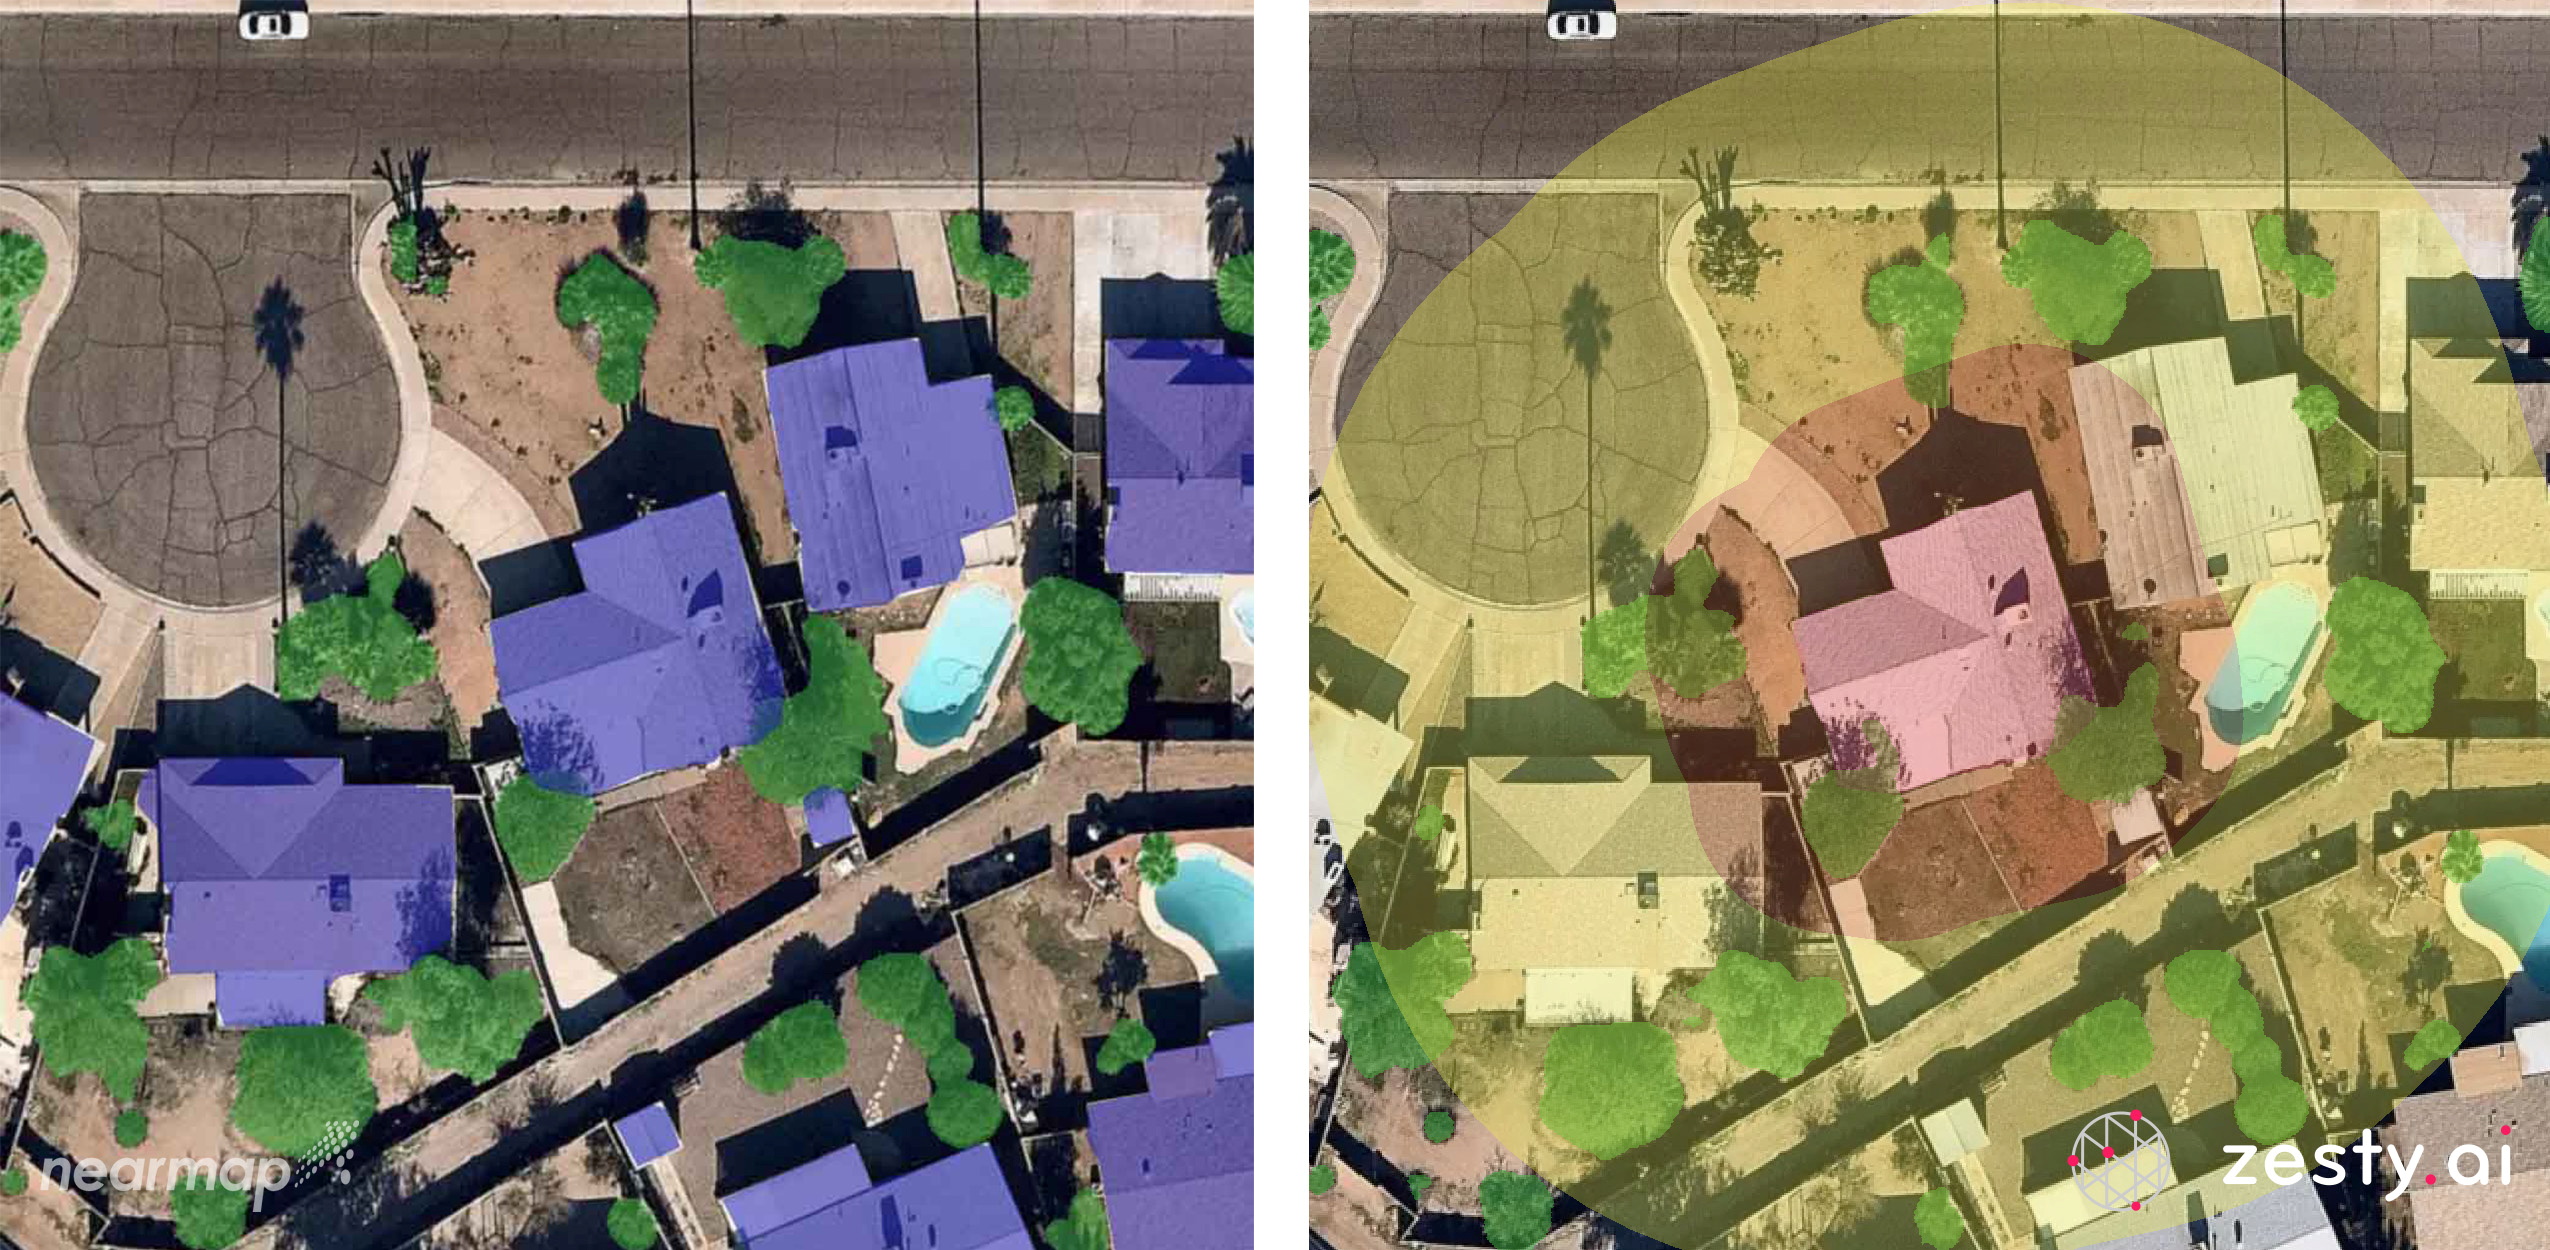 Handout combo image supplied shows Zesty.ai compute the fraction of an area occupied by combustible vegetation and if buildings are present, in California, U.S., in this undated 2020 image